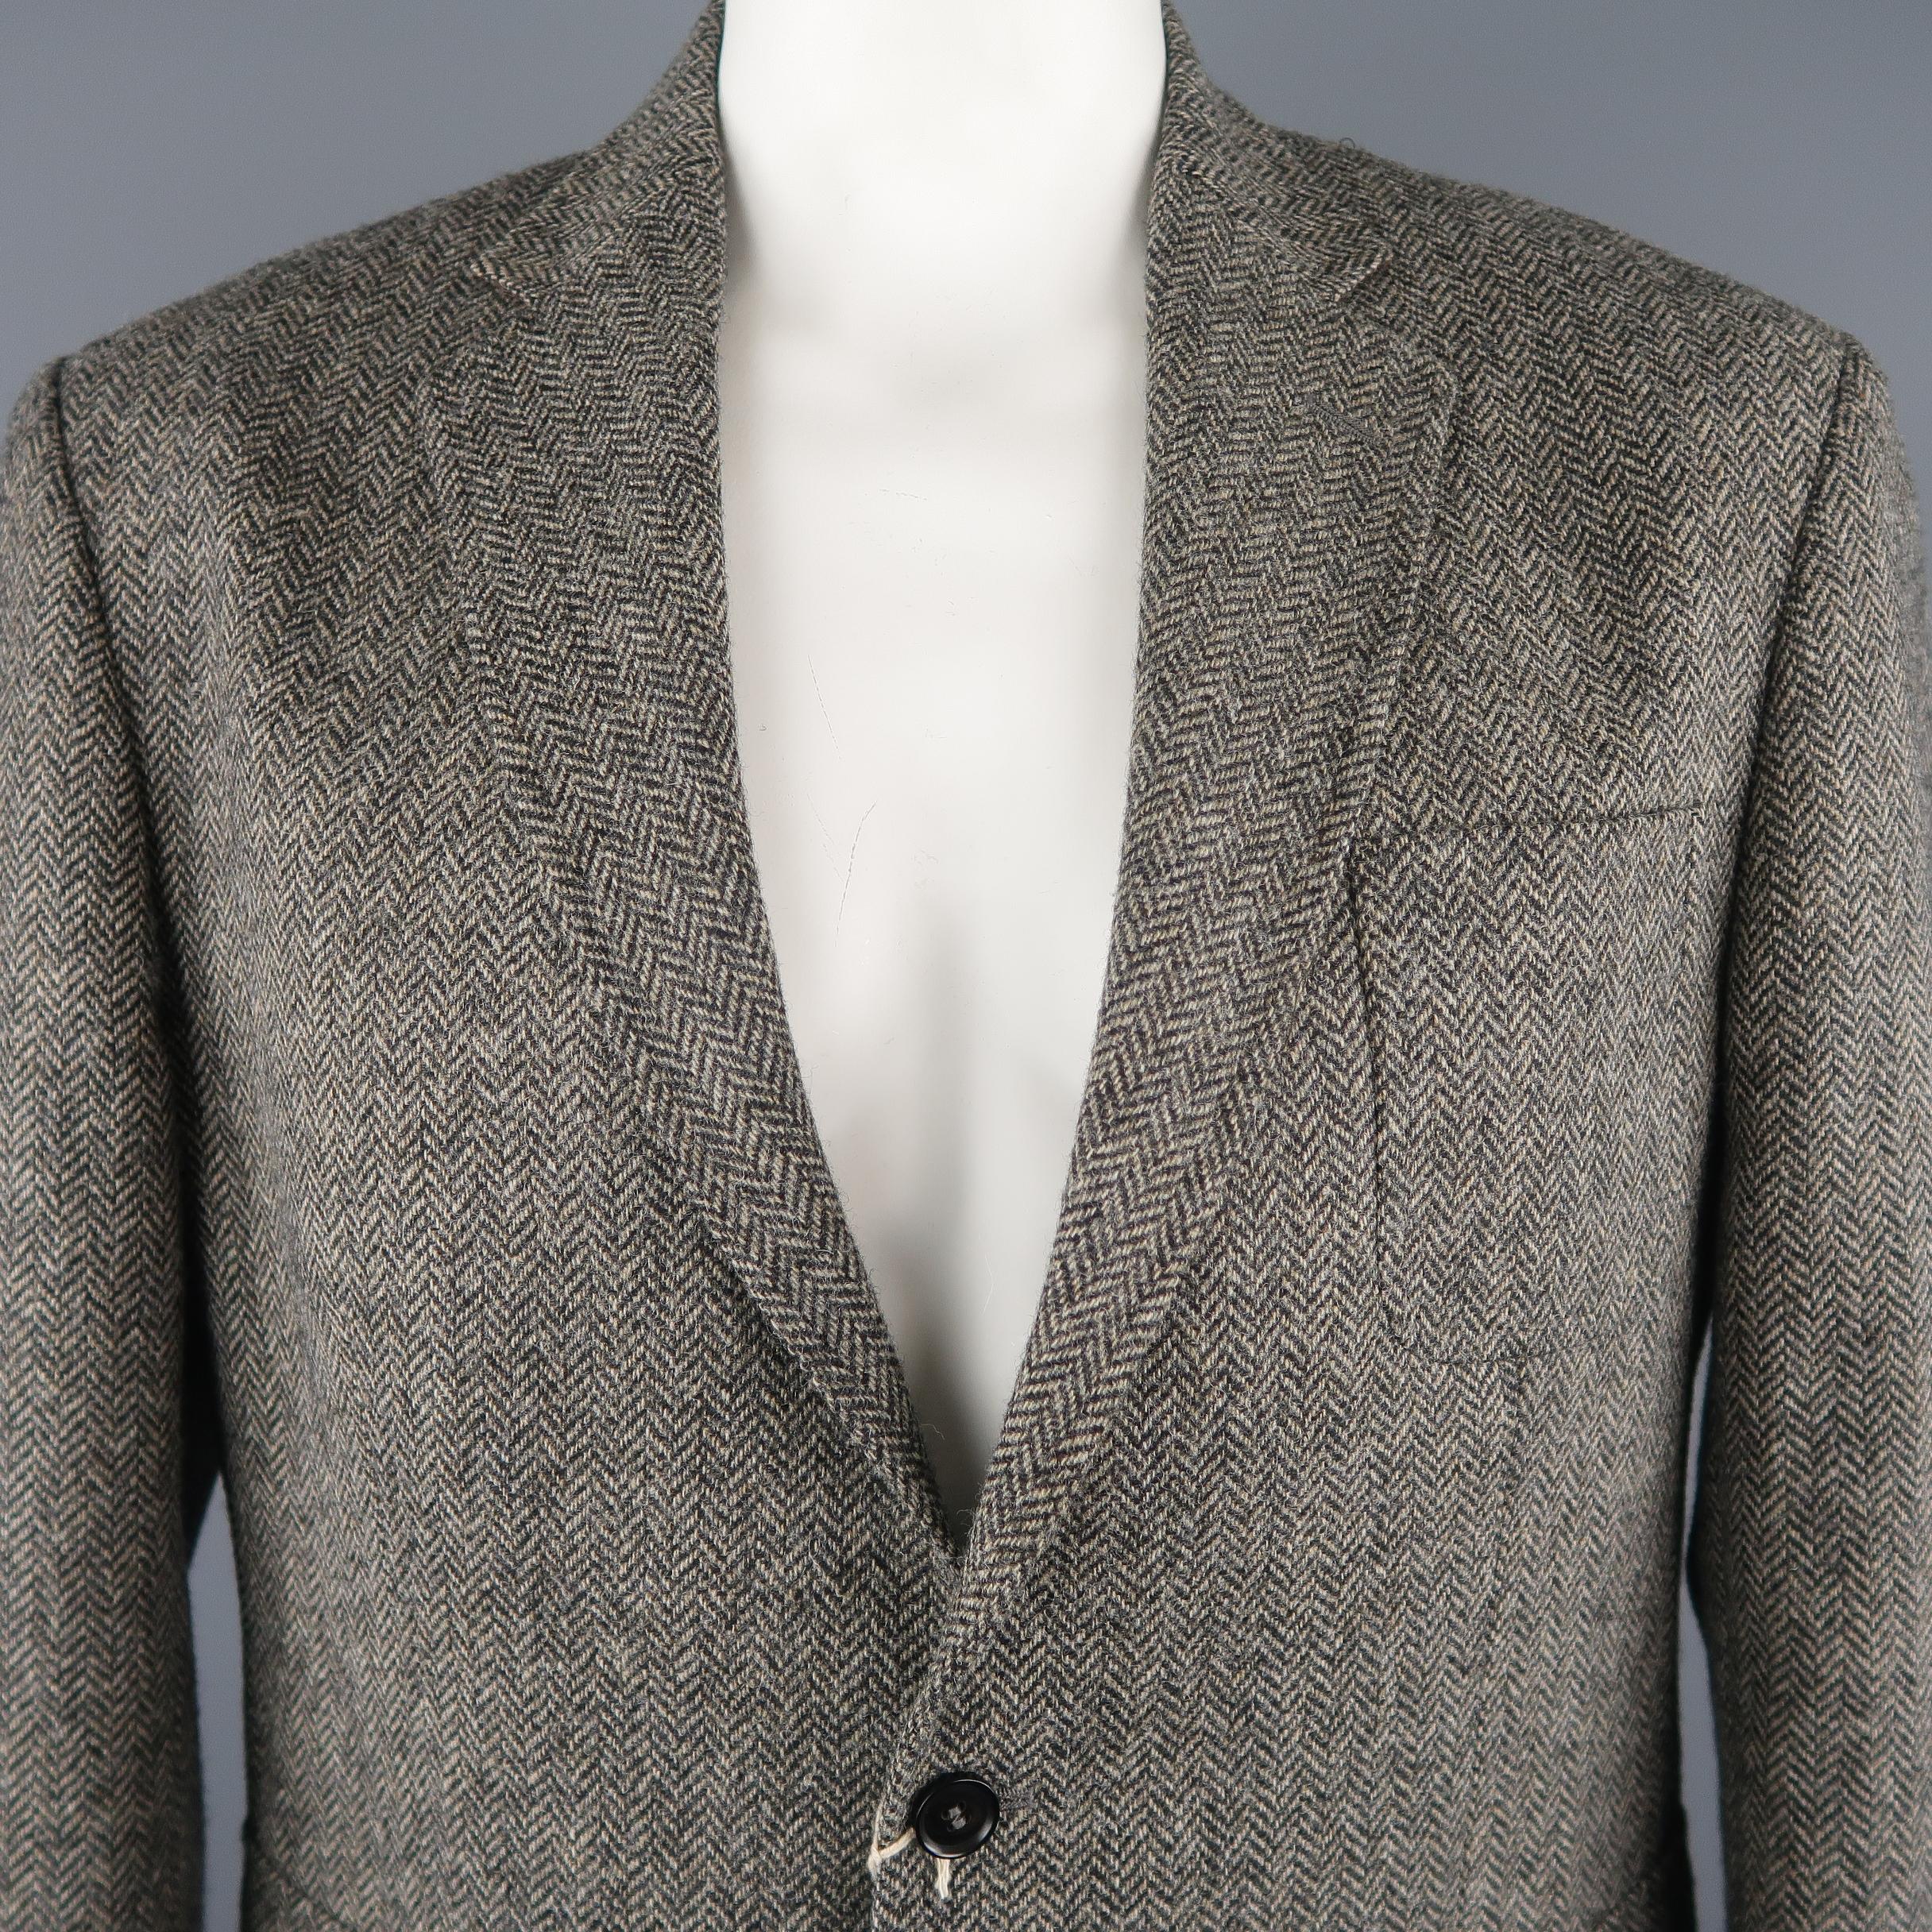 BILLY RED blazer comes in a grey tone in a herringbone wool material, featuring a notch lapel, patch pockets, 2 buttons closure, single breasted and a regular fit. Made in Italy.
 
New With Tags.
Marked: 44R
 
Measurements:
 
Shoulder: 19 in.
Chest: